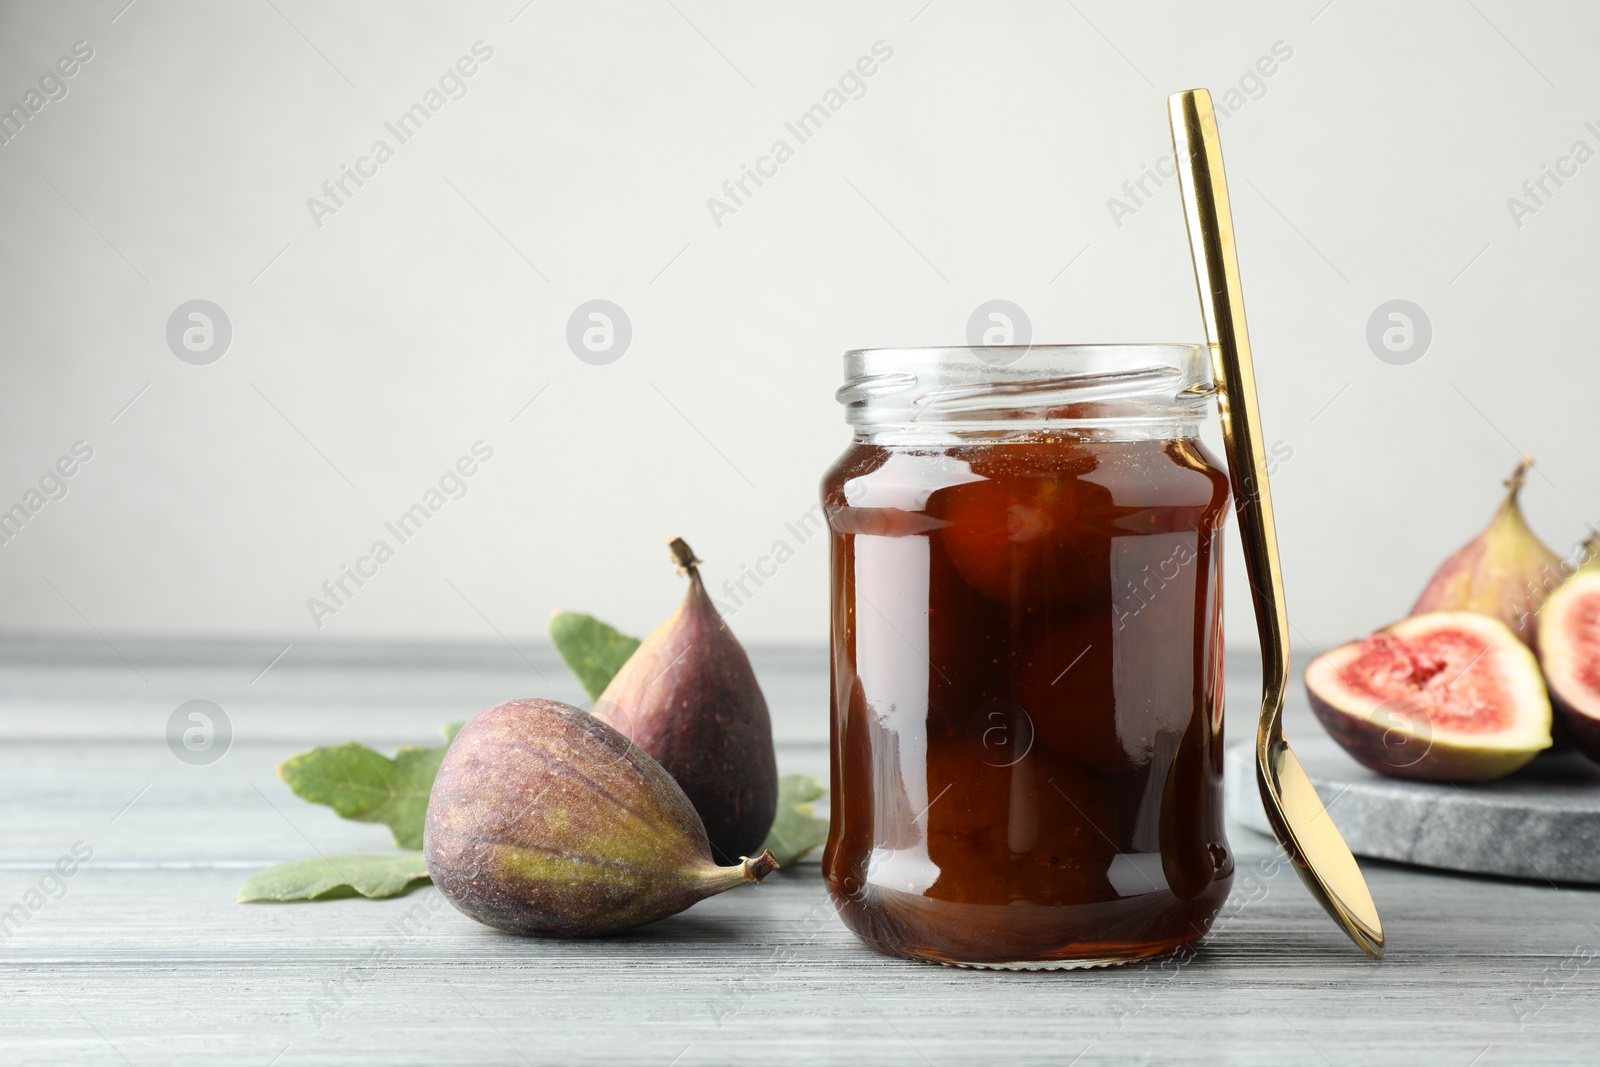 Photo of Jar of tasty sweet jam and fresh figs on grey table